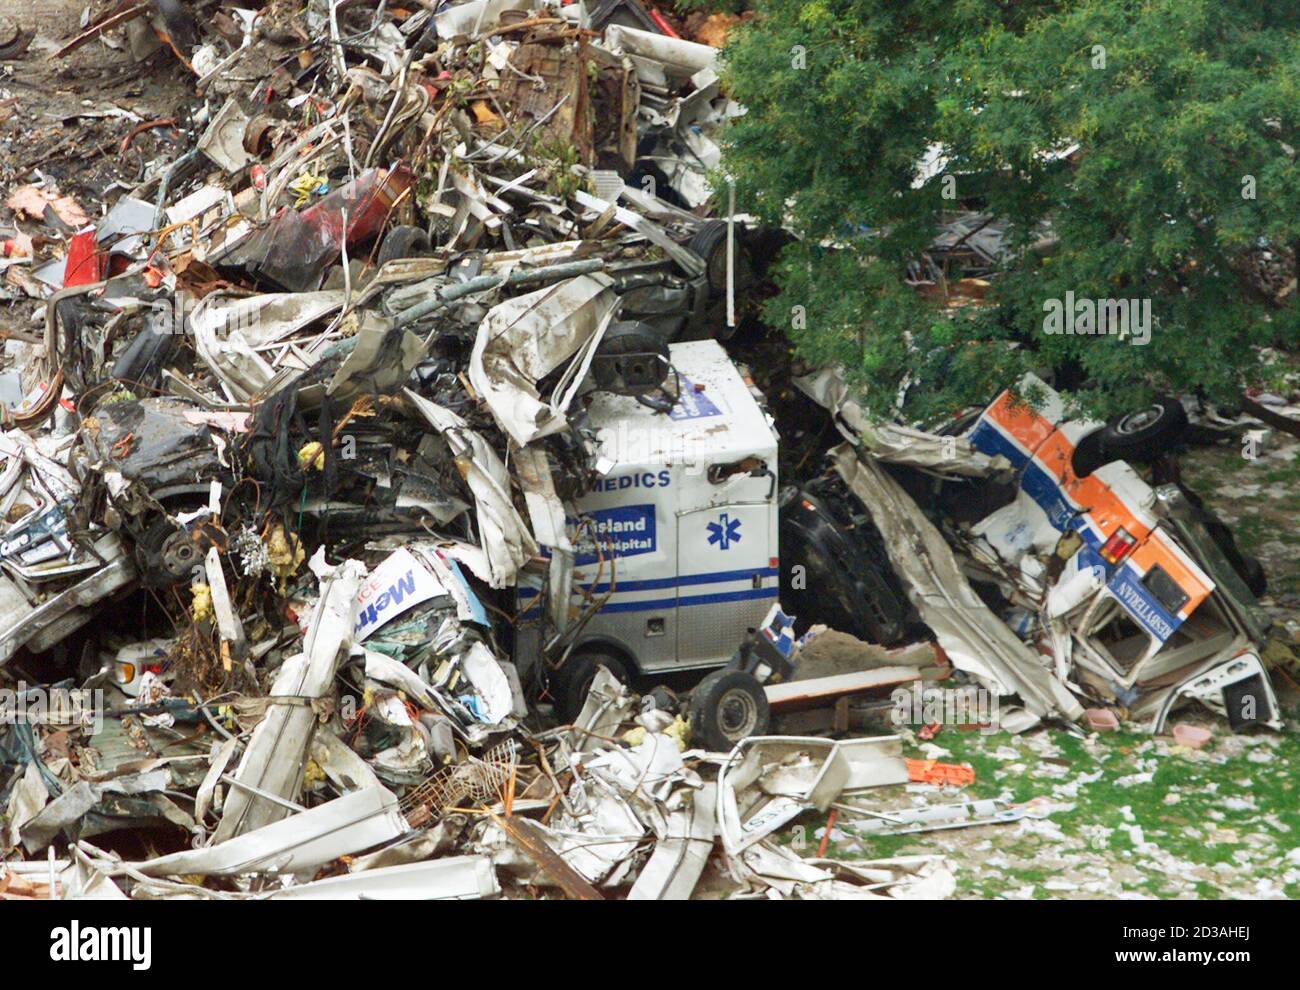 Destroyed vehicles, including ambulances, are piled up near the site of the World Trade Center attack in New York September 21, 2001. The vehicles were crushed when the Trade Center towers collapsed in the attack September 11. Rescue workers brought in more heavy equipment to clear the smoldering ruins of the World Trade Center on Friday, a tacit admission that hope for finding survivors among the 6,333 missing was all but gone. REUTERS/Dylan Martinez  RTW Stock Photo